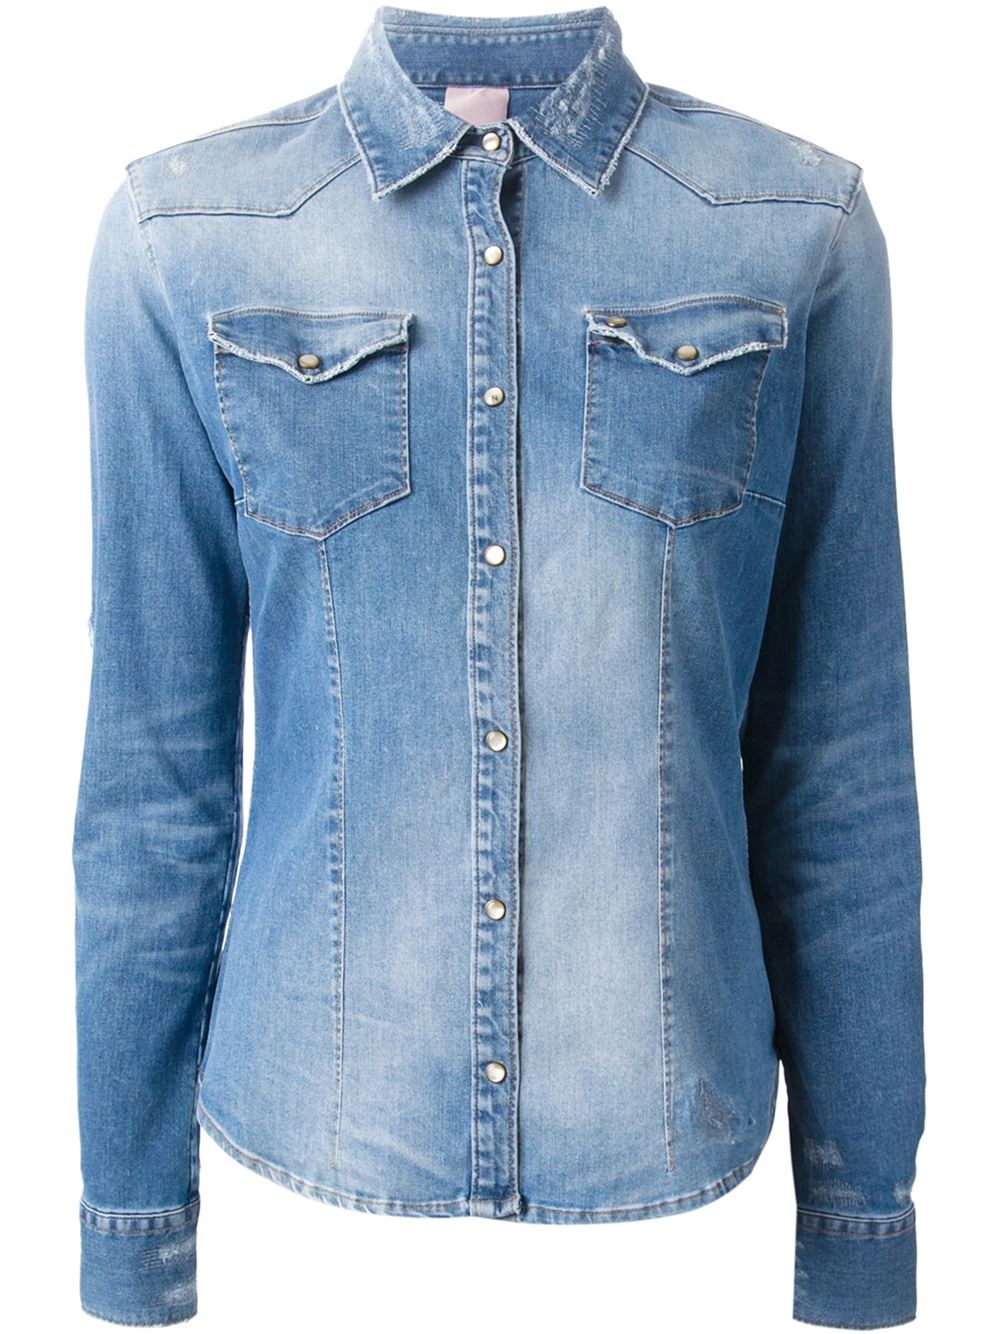 Blue cotton blend distressed denim shirt from +People